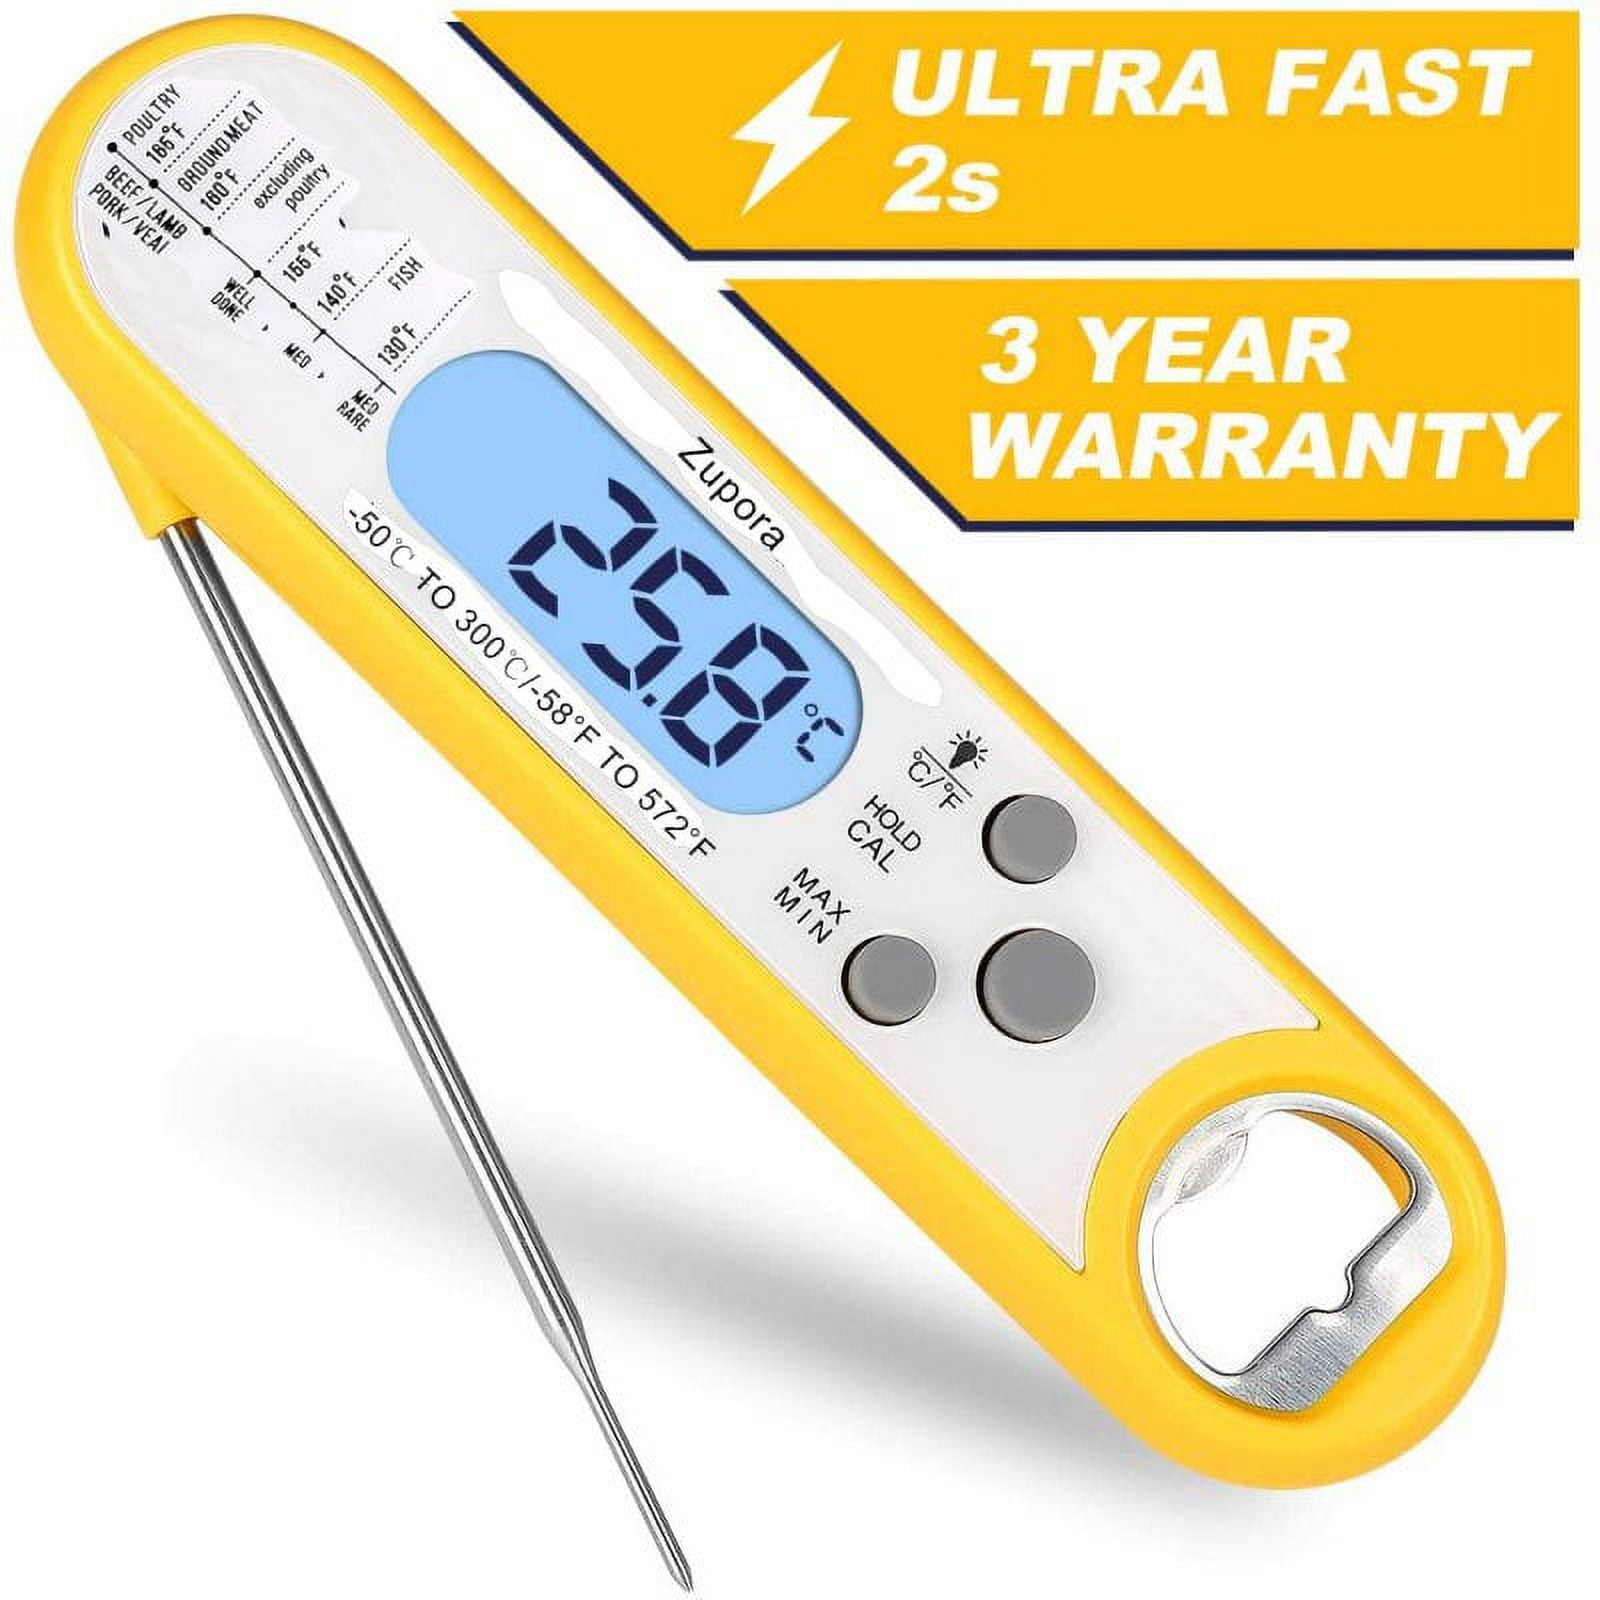 ComfiTime Dual Probe Meat Thermometer - Digital Food Thermometer with  Alarm, for Cooking, Candy, Oven, Grill and Deep Fry. Accurate Instant Read  or Stay-in-Oven Kitchen Thermometer, Pre-Calibrated 